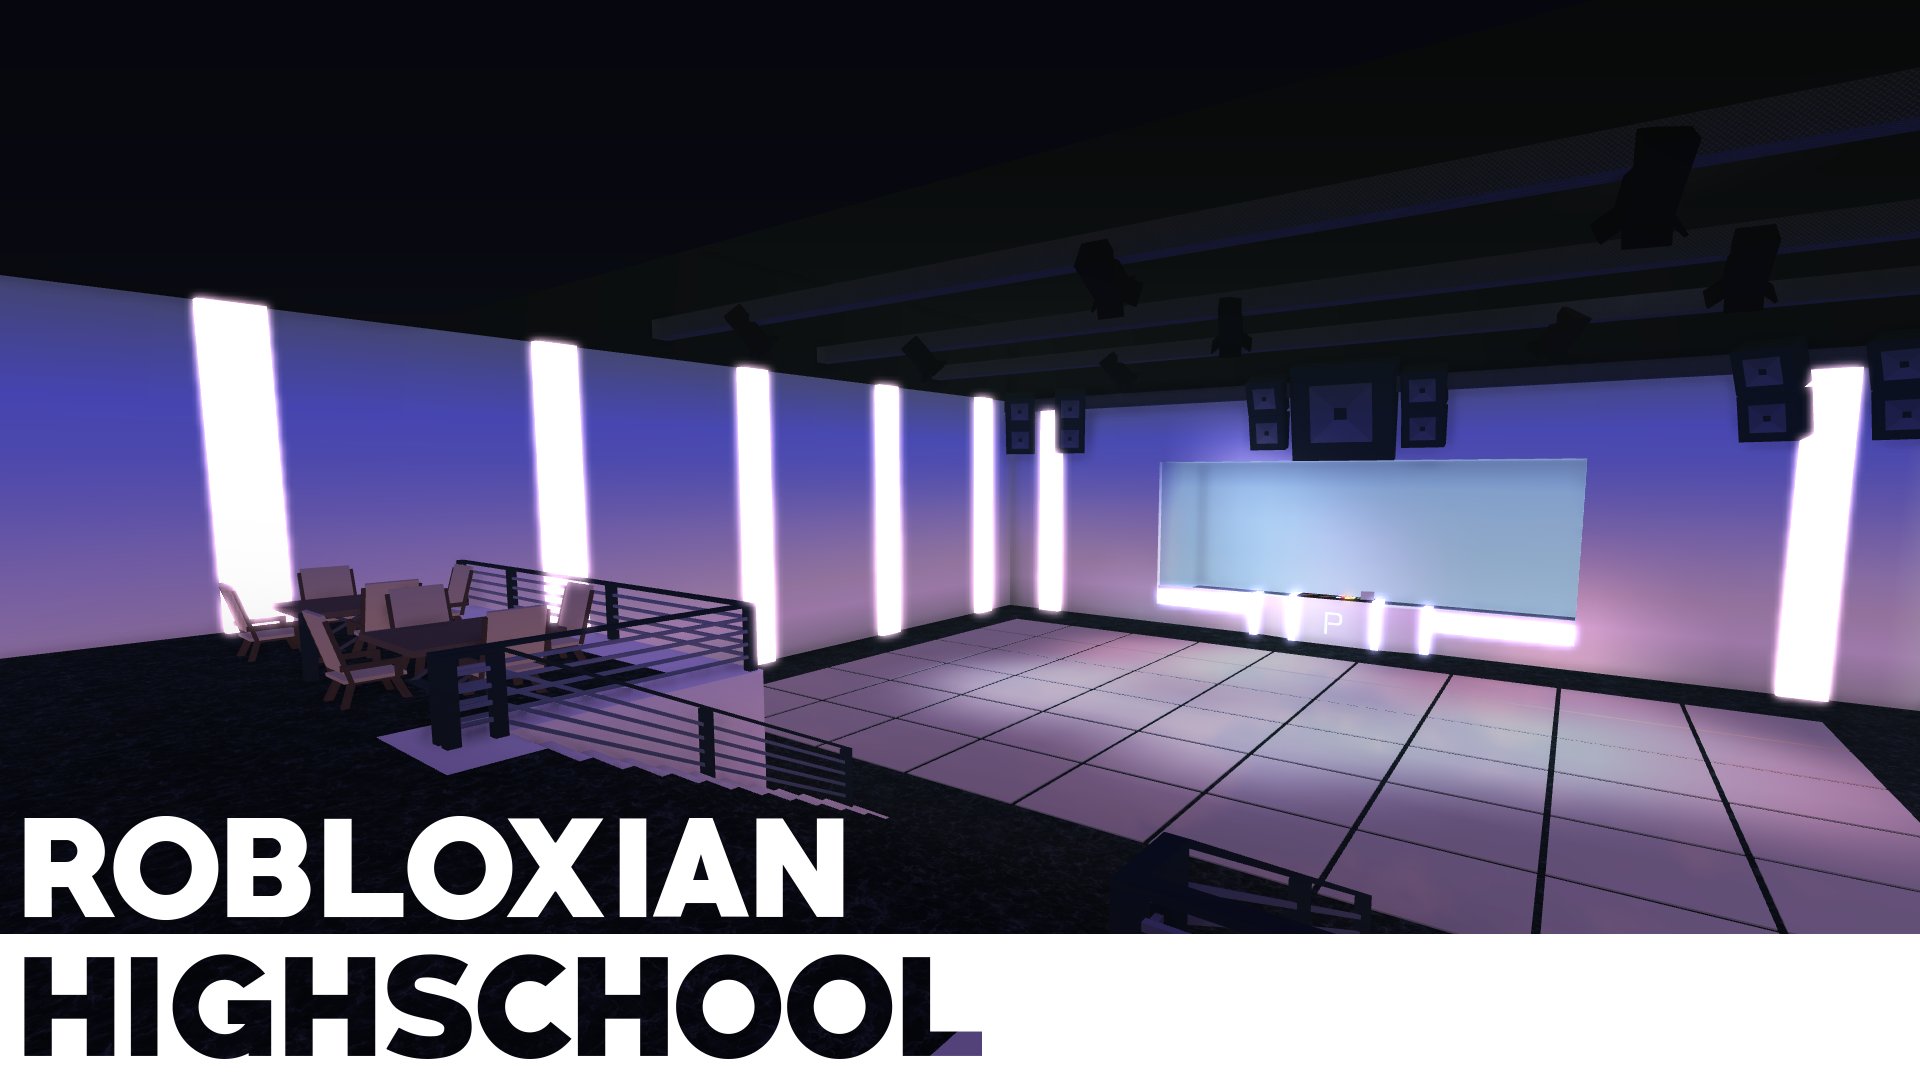 Robloxian High School On Twitter The New Update Comes Out Later Tonight Are You Excited To Explore The New Map Race The New Cars And Go To New Classes Roblox Https T Co Woubkjjobv - robloxian highschool on twitter tomorrows update will